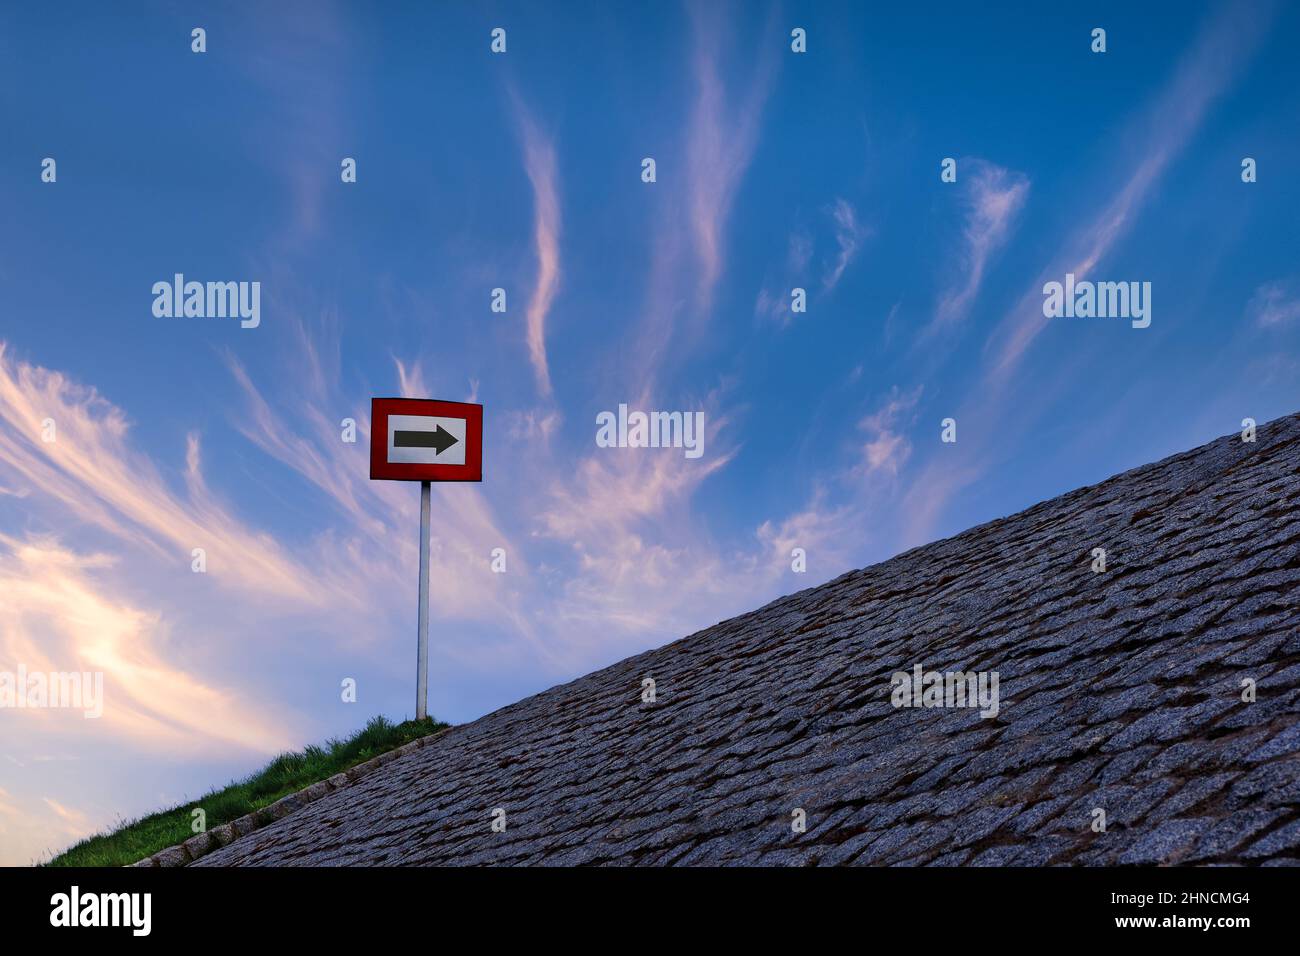 Black arrow on white background and in red frame standing atop of cobblestone paved hill at sunset. Blue sky with great clouds. Copy space, concept Stock Photo